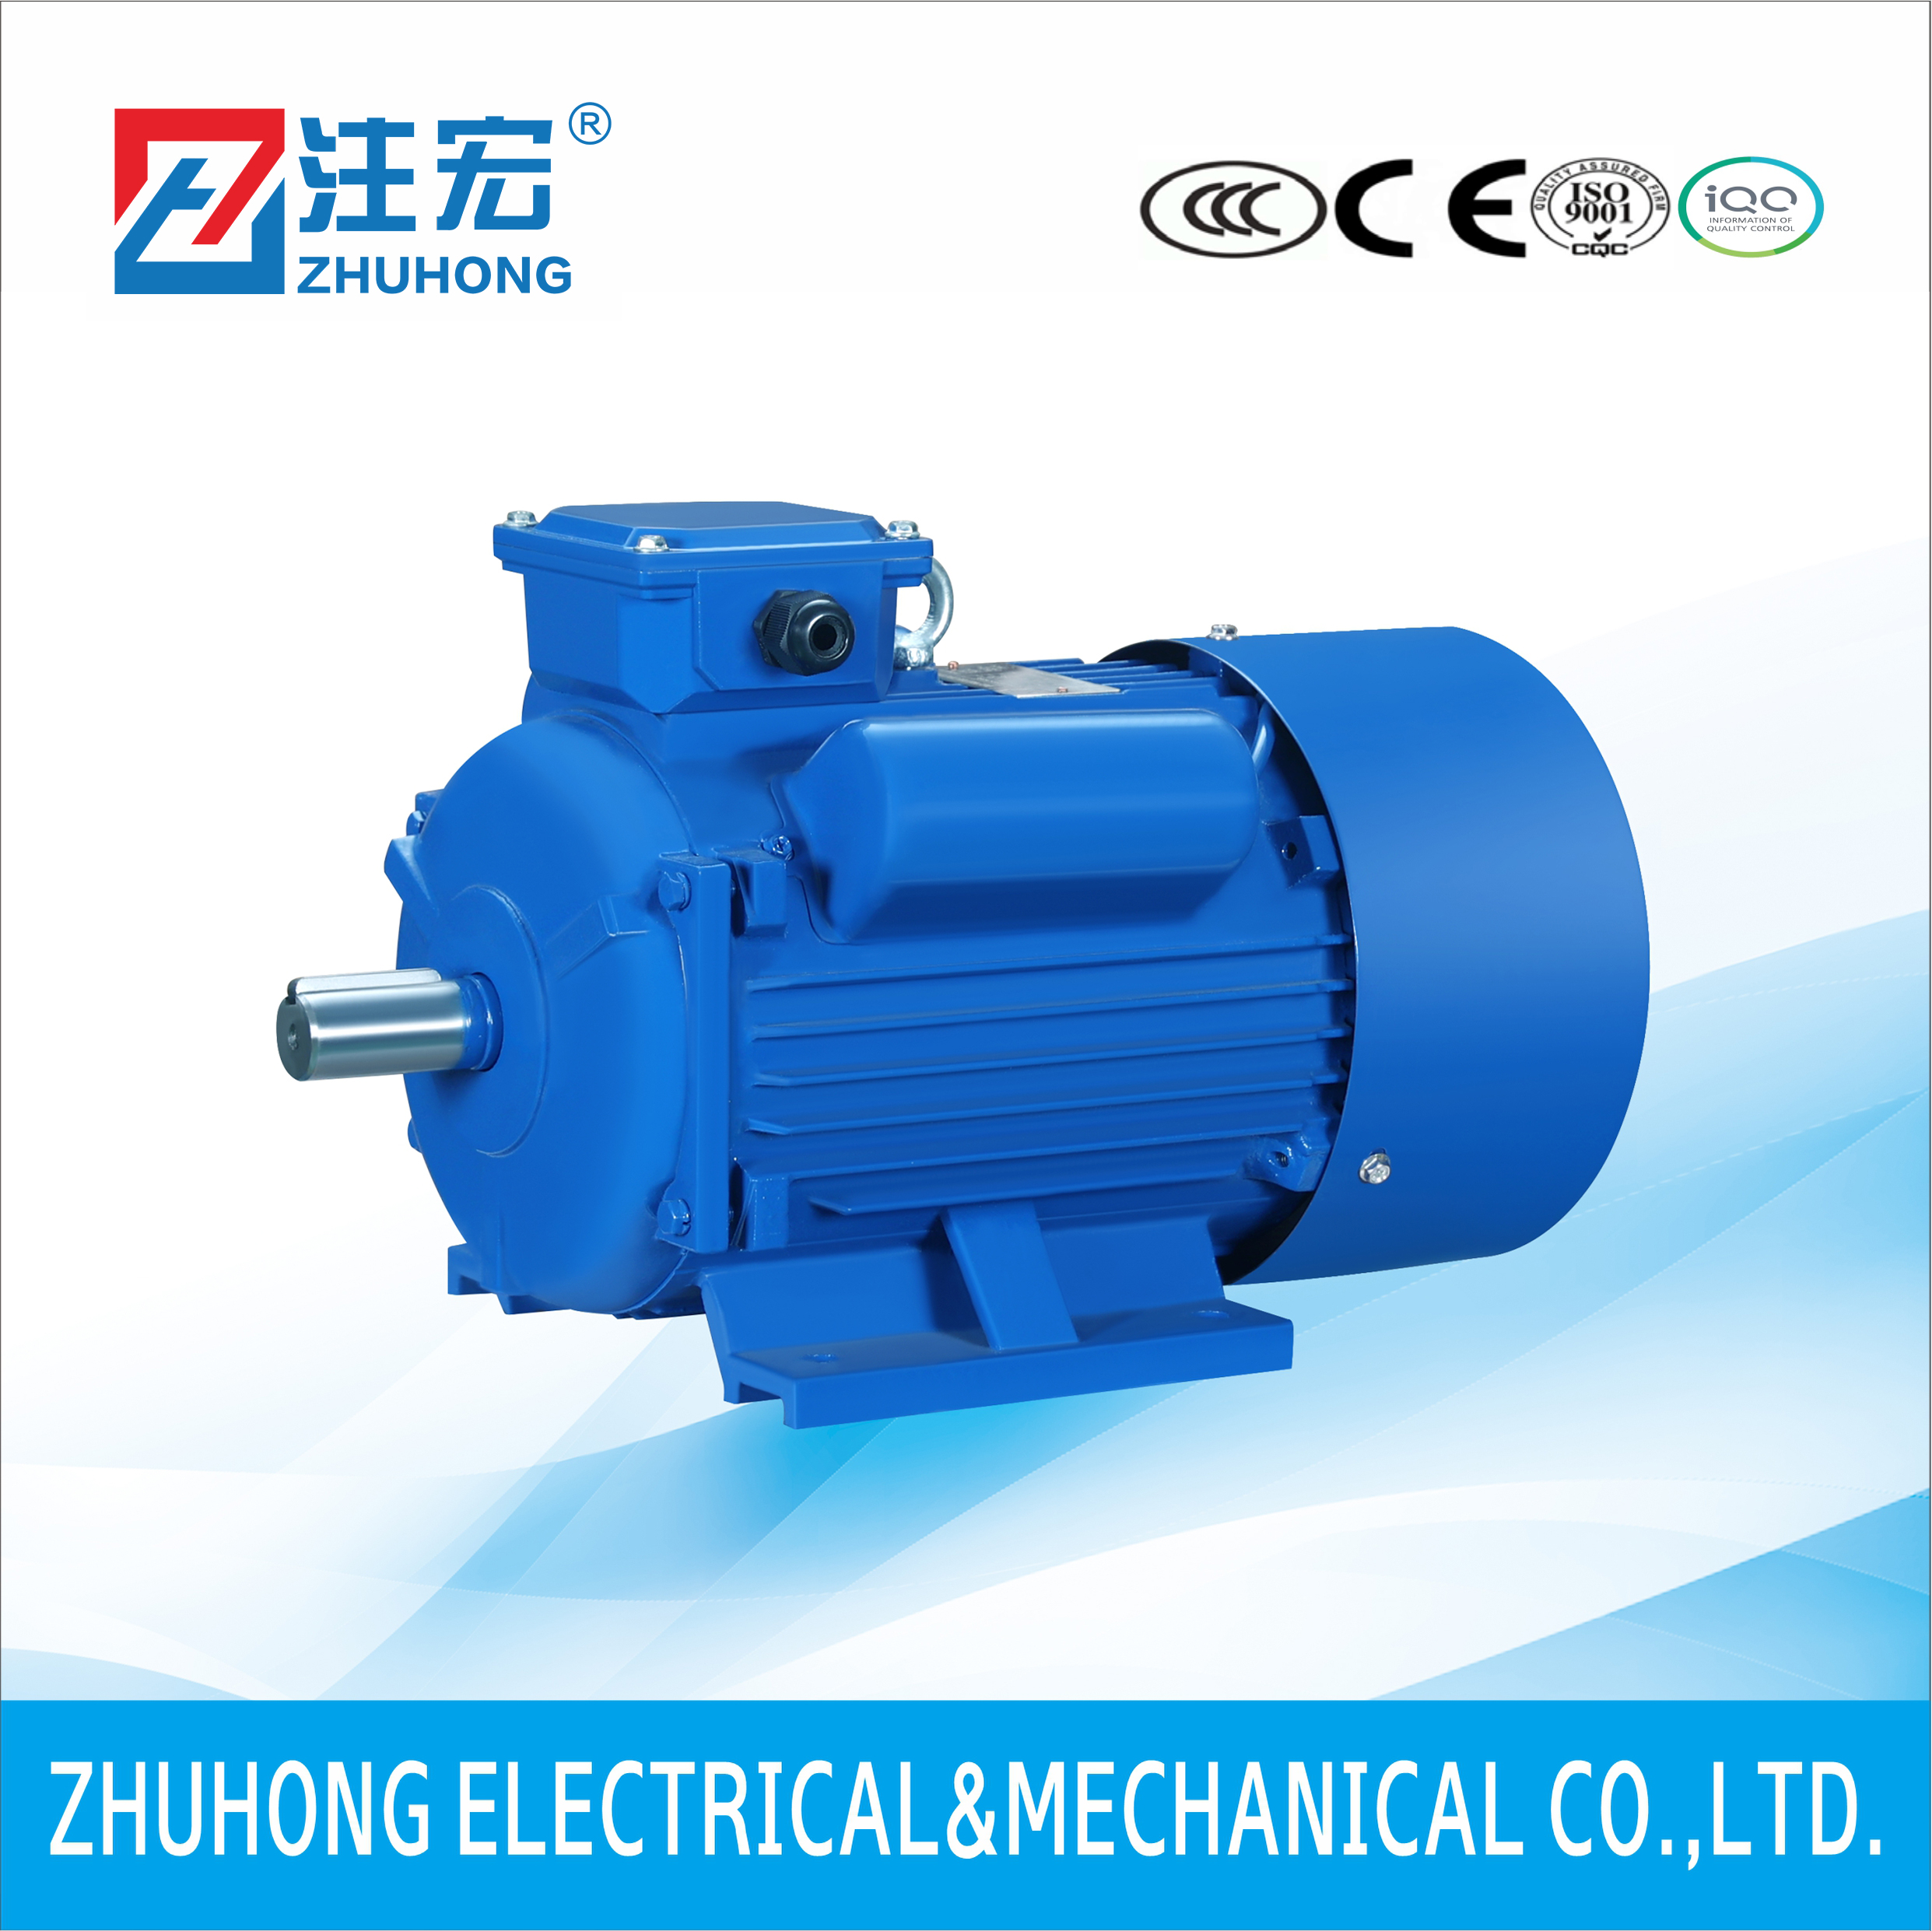 YC Series Capacitor Starting Single Phase Motor with Cast Iron Body Featured Image